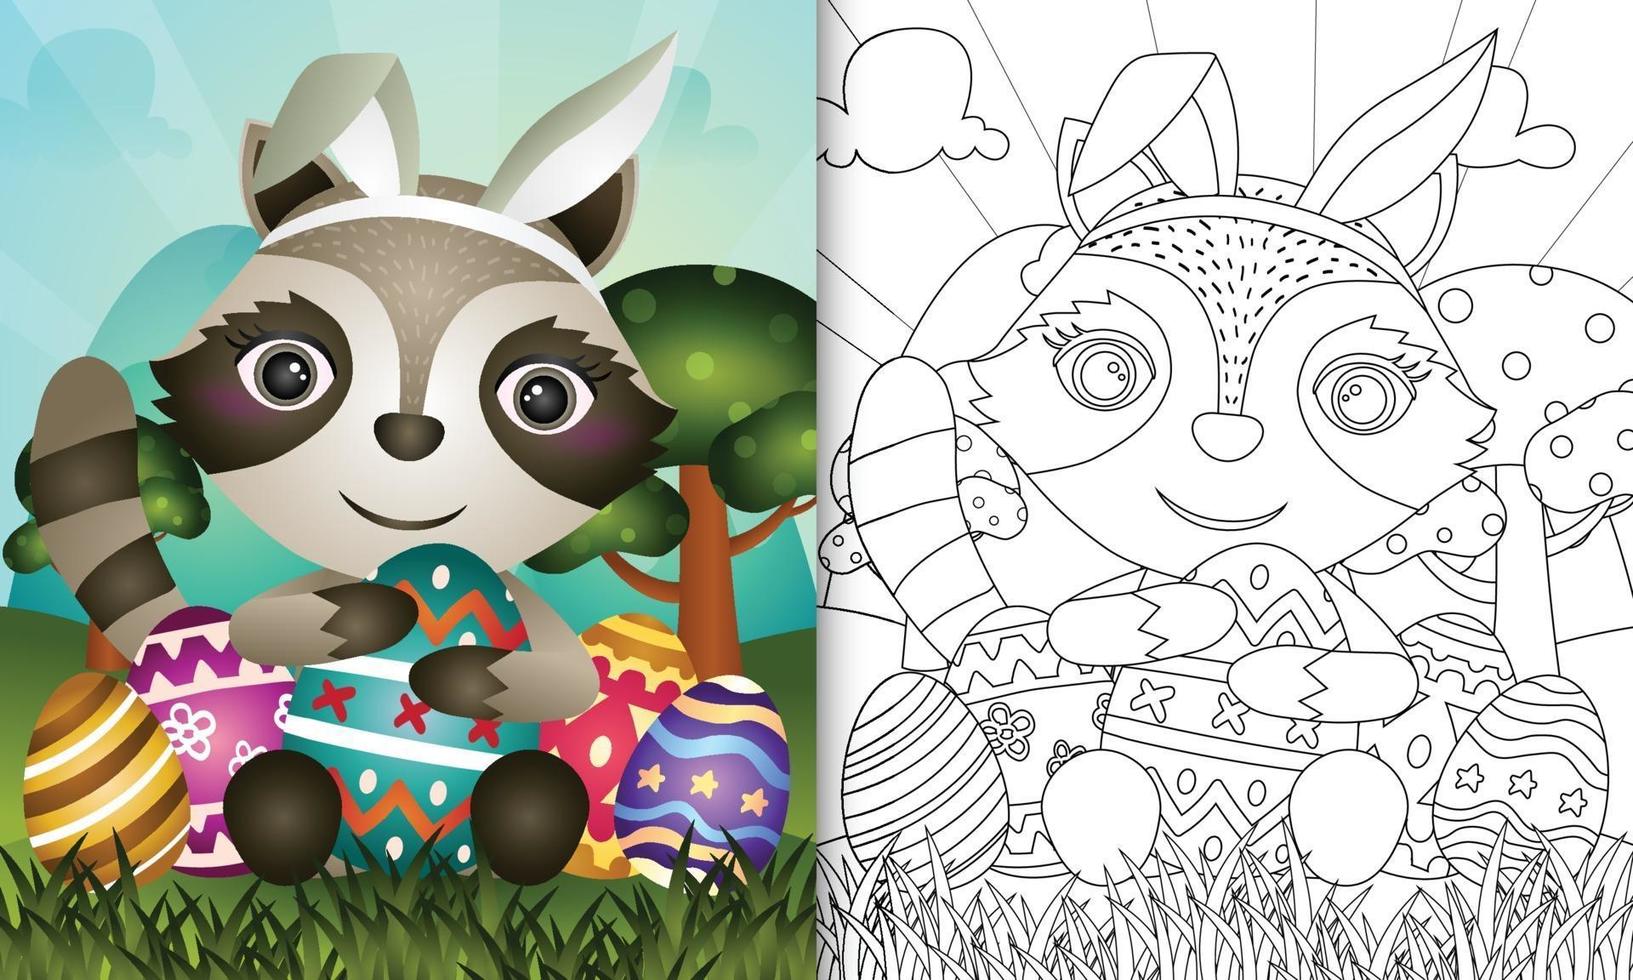 Coloring book for kids themed easter with a cute raccoon using bunny ears vector